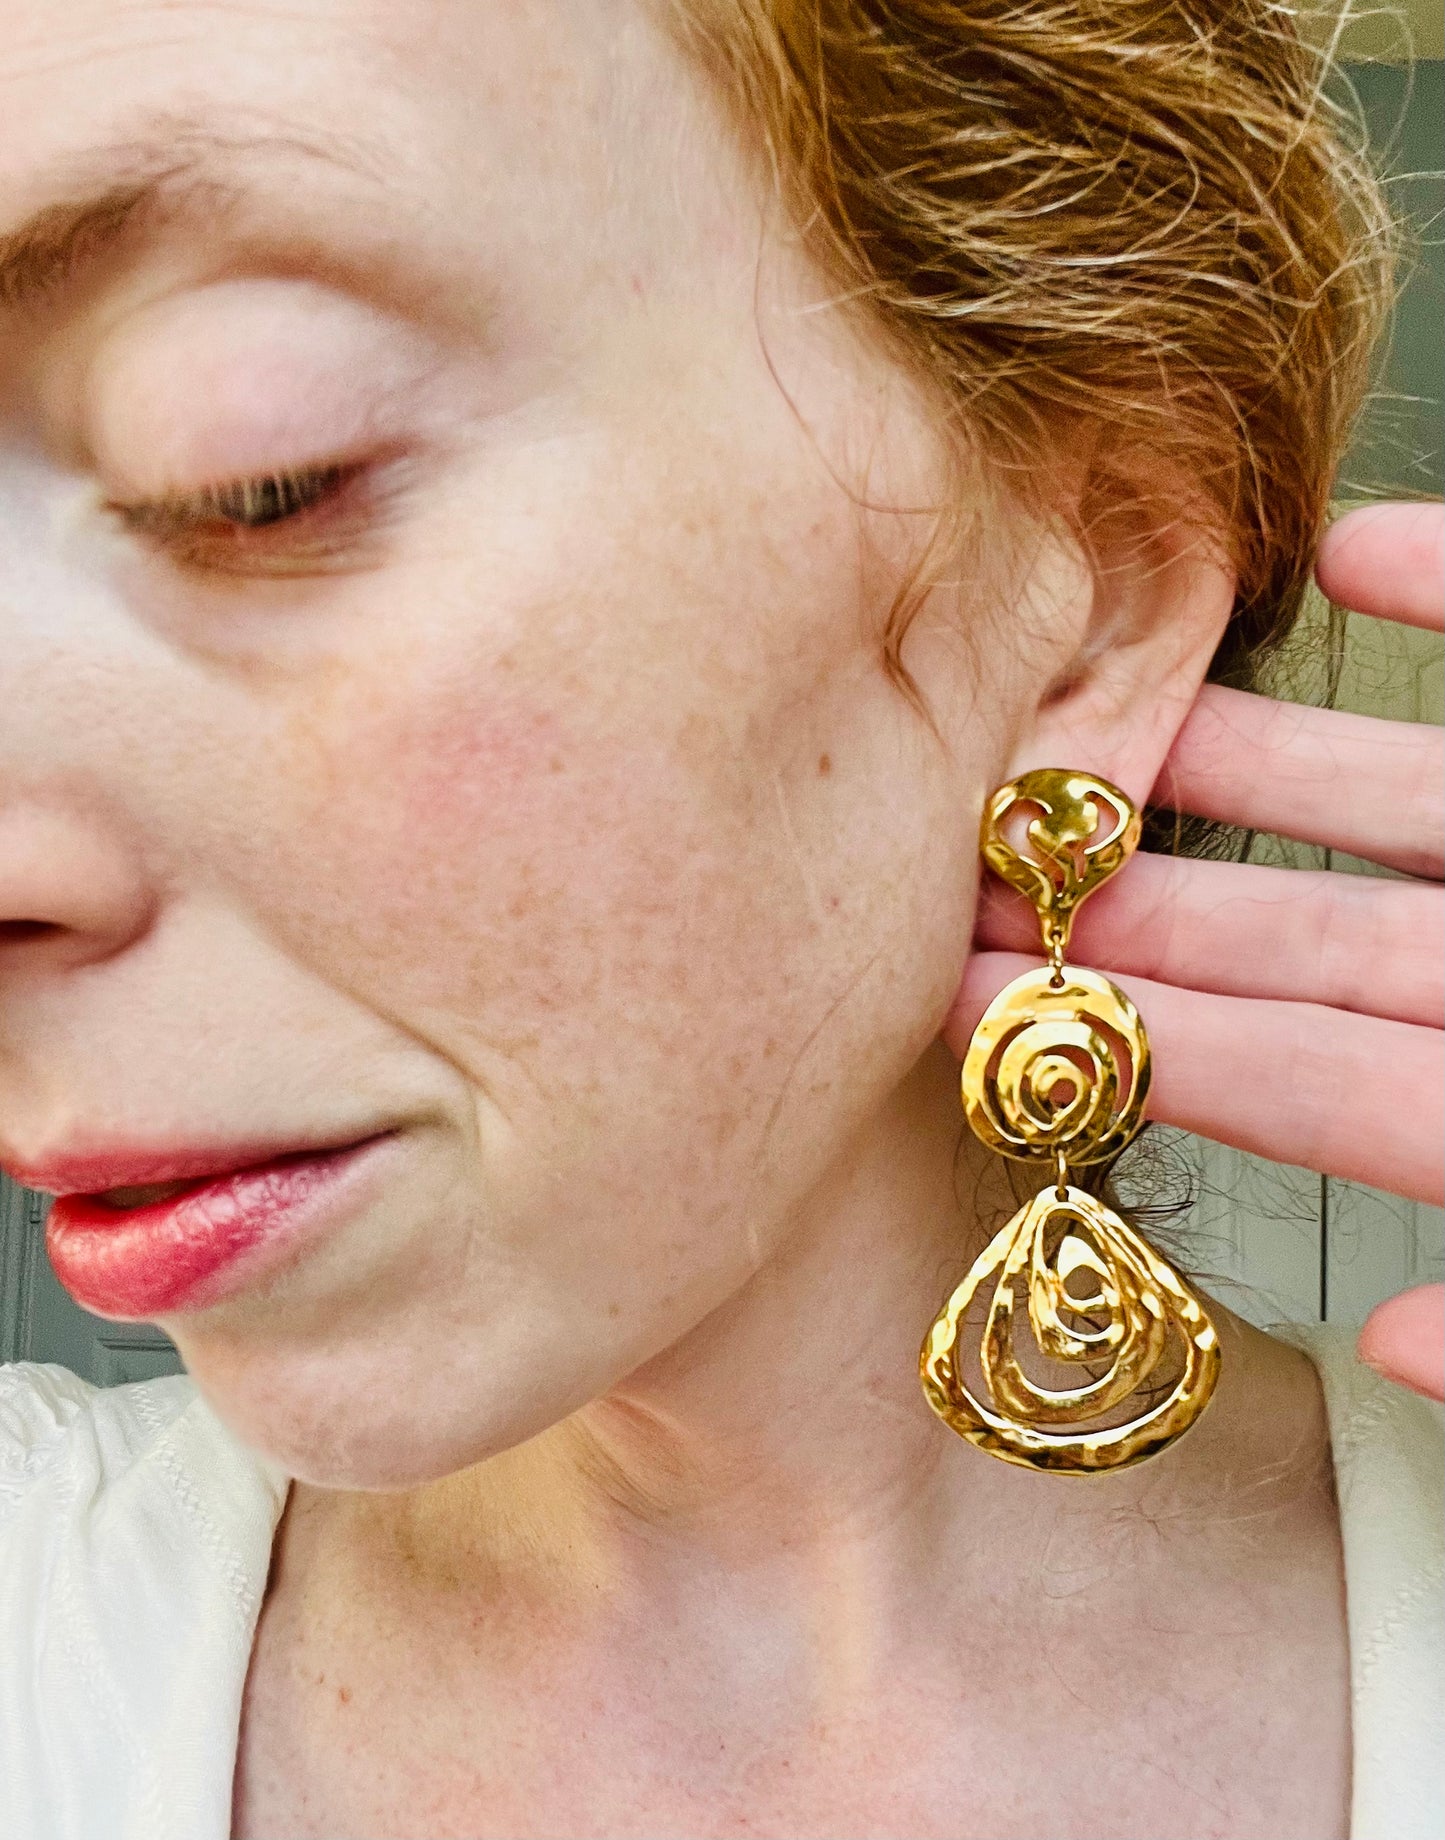 Vintage Large Shiny Gold Spiral Pierced Earrings